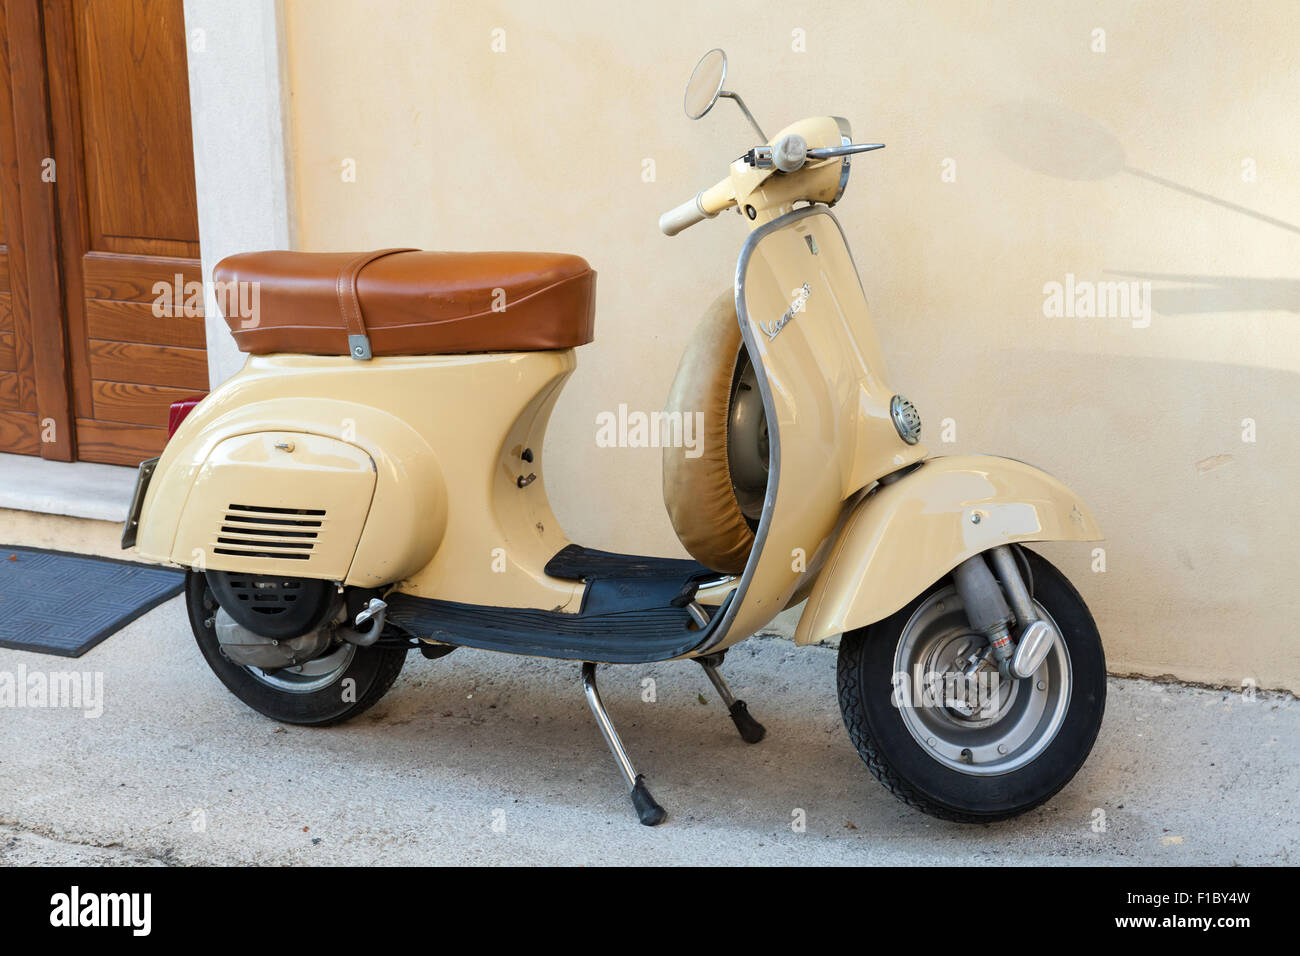 Gaeta, Italy - August 19, 2015: Classical yellow Vespa scooter stands parked near the wall Stock Photo